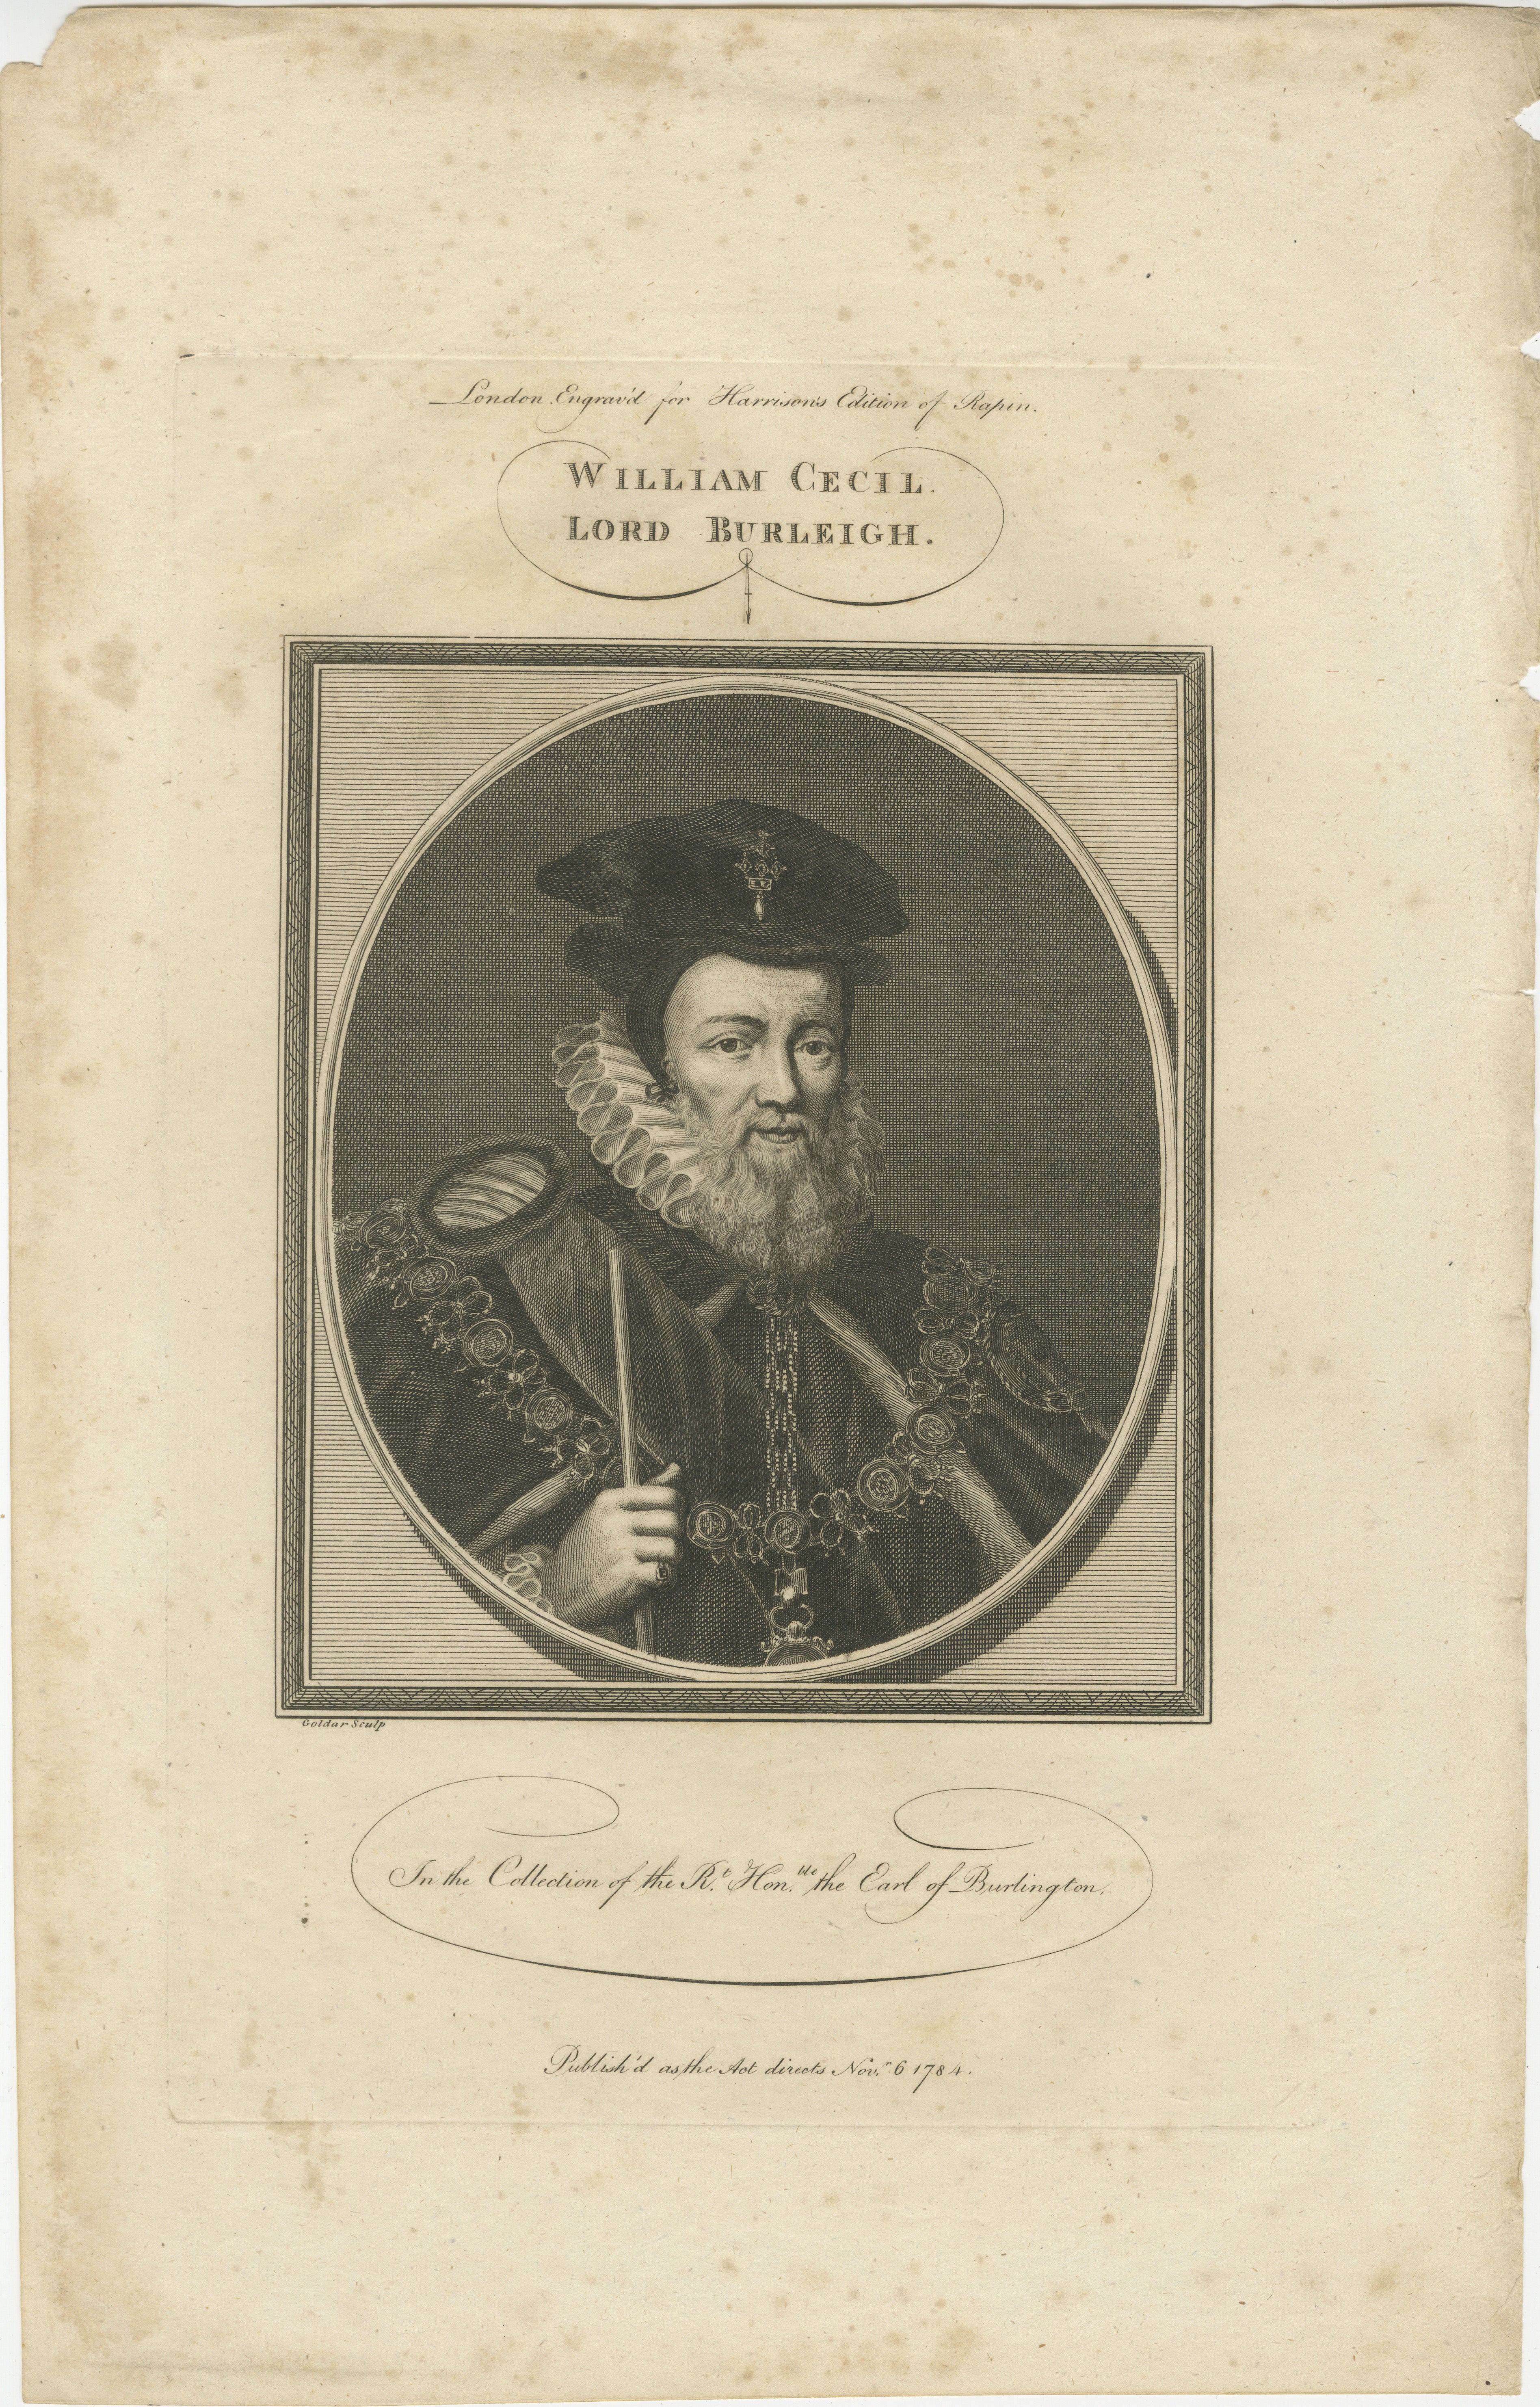 The image is an original engraved portrait of William Cecil, Lord Burleigh. 

William Cecil, 1st Baron Burghley, was a prominent statesman of the Tudor period in England and one of Queen Elizabeth I's closest advisors. He served as Secretary of